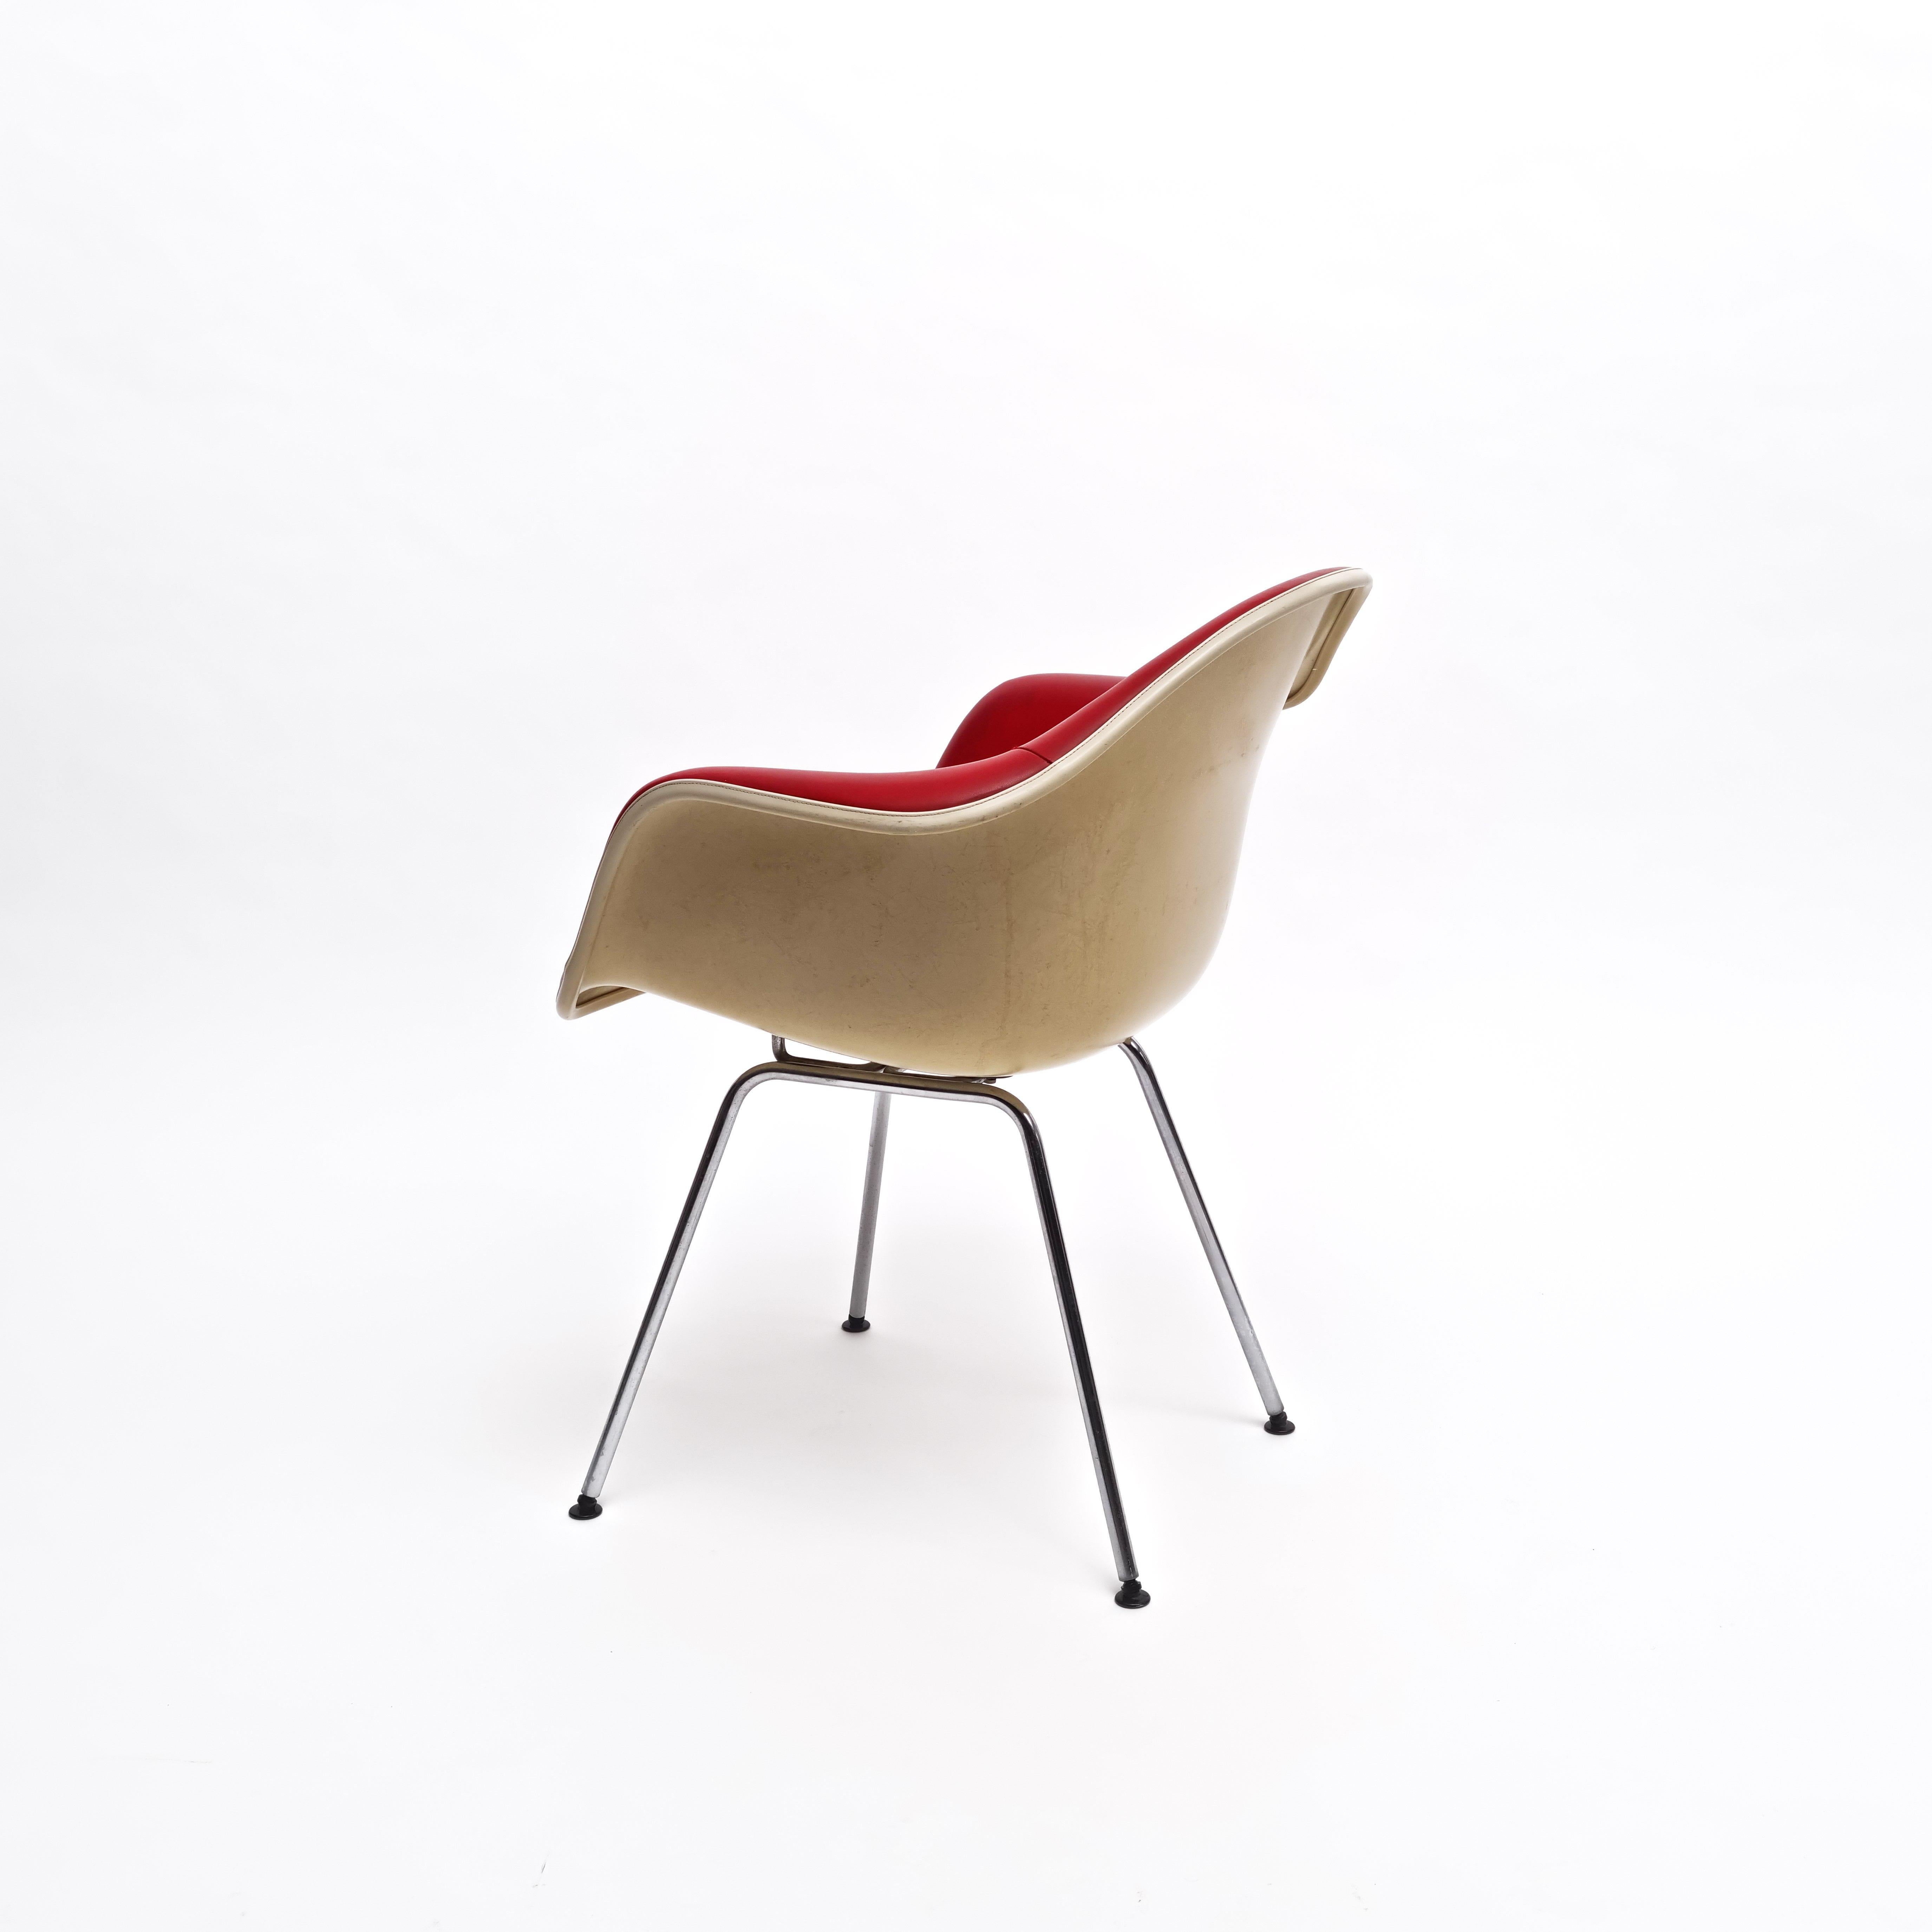 A Dax rope edge fiberglass Zenith shell chair designed by Charles & Ray Eames for Herman Miller Co. with aluminum-finished legs retaining the original red leather upholstery over a fiberglass shell.
Made by Herman Miller in the USA, circa 1960s.